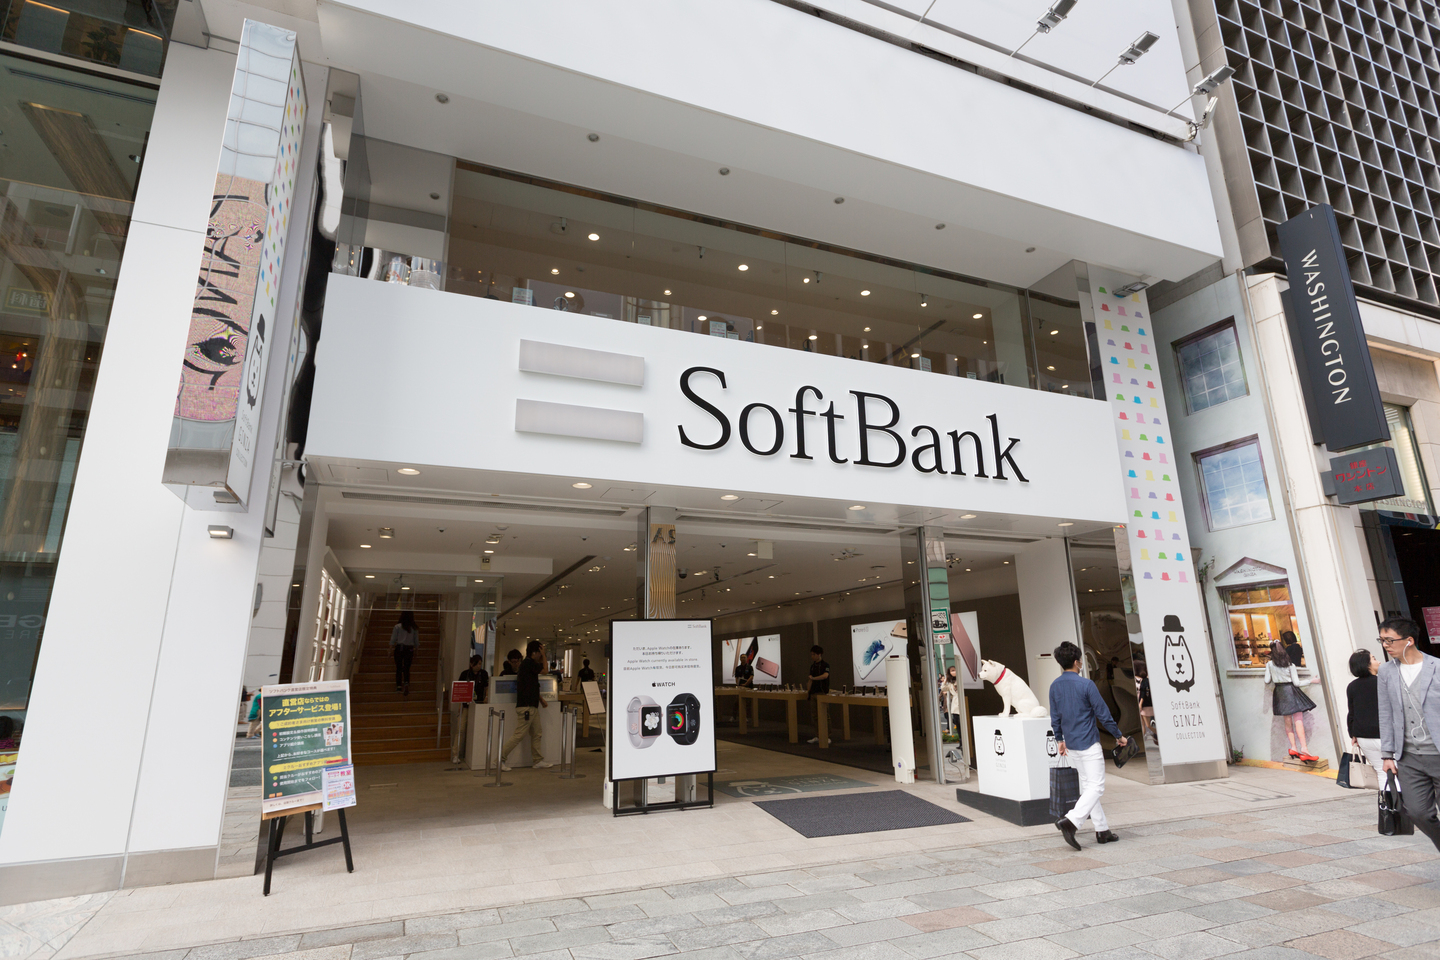 Can ARM’s IPO Revive Softbank's “VISION” and Save Its Founder, Financially ? 安谋上市救软银， 以及创办人?